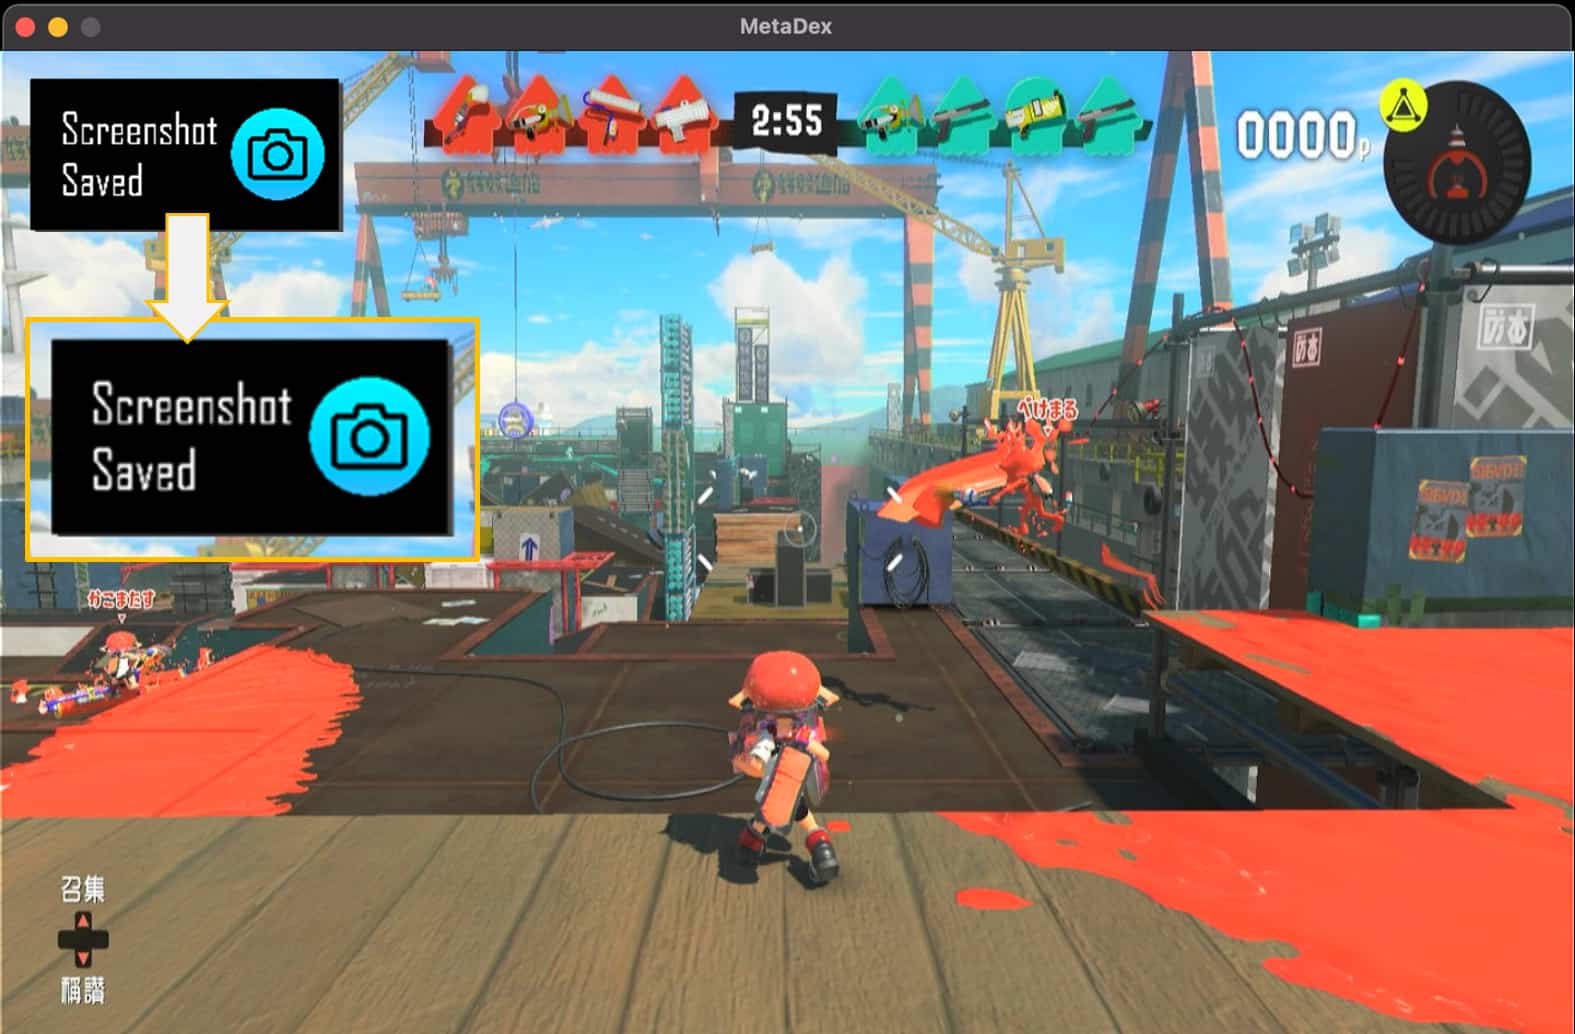 take a screenshot of 《斯普拉遁3/splatoon 3》 in MetaDex when Switch connect to laptop with streaming cable t1 to play 《斯普拉遁3/splatoon 3》